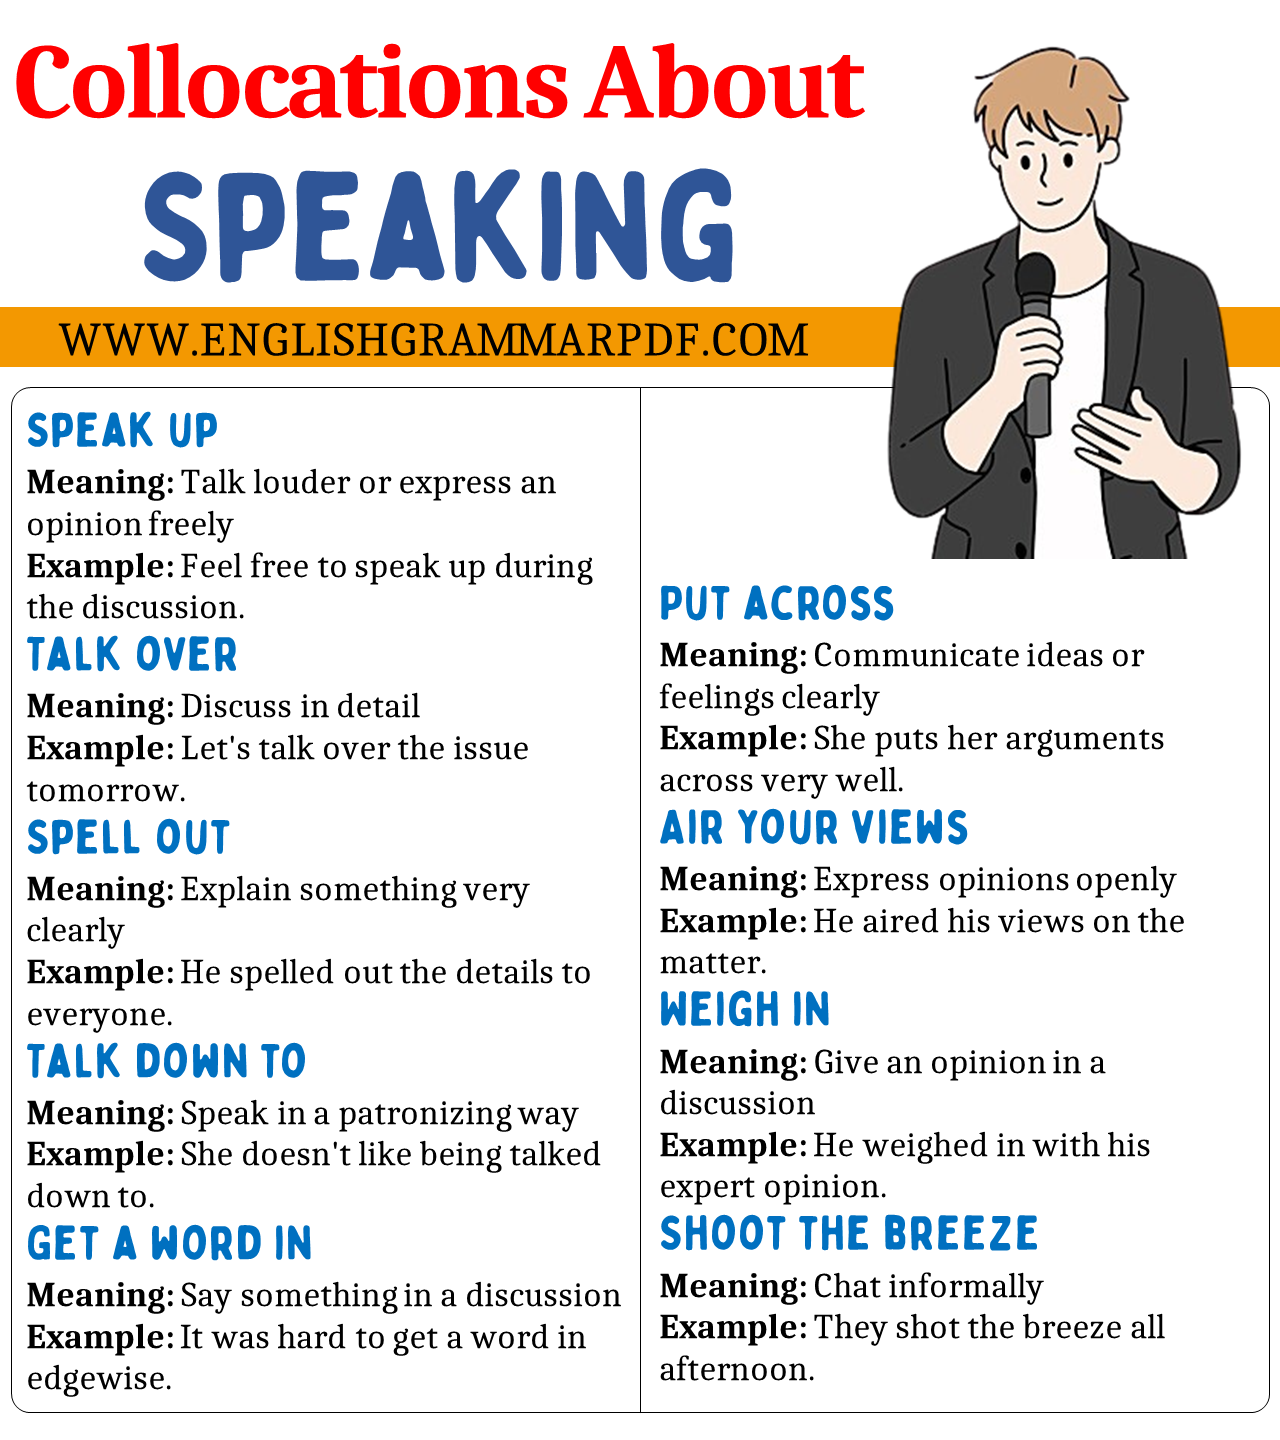 Collocations about Speaking